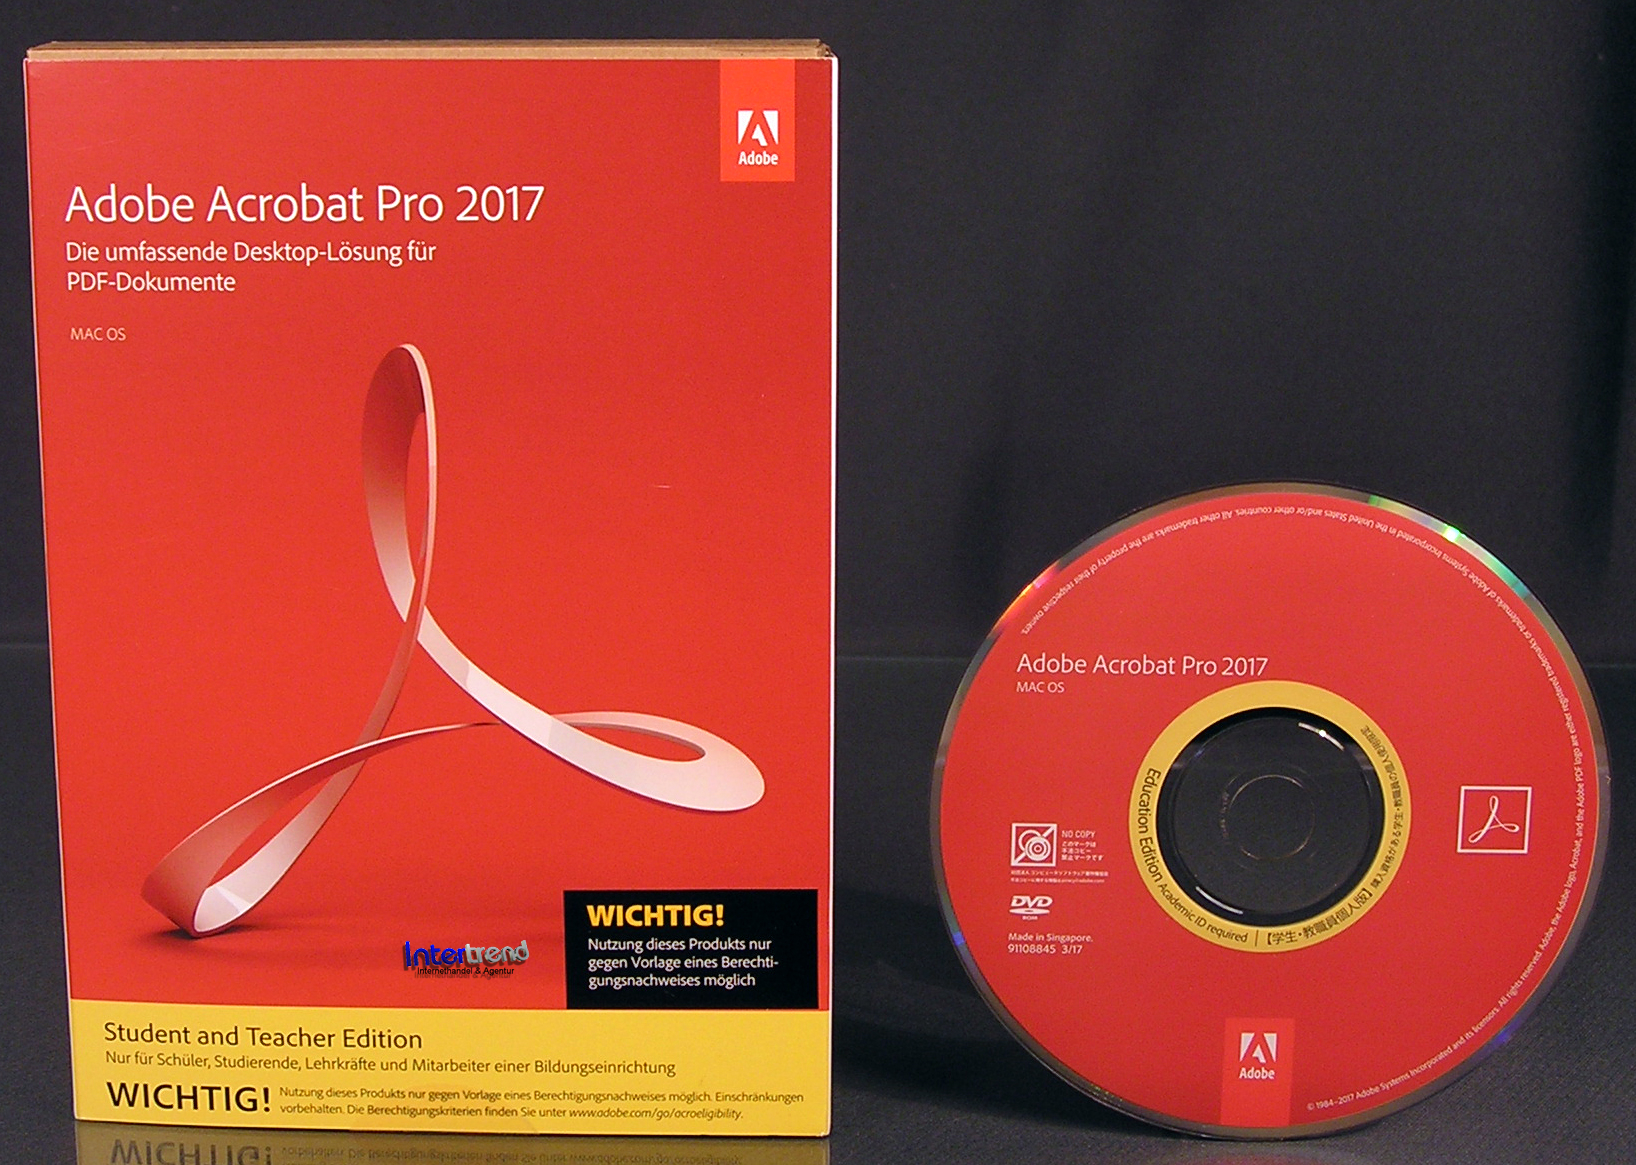 adobe acrobat pro 2017 student and teacher edition download